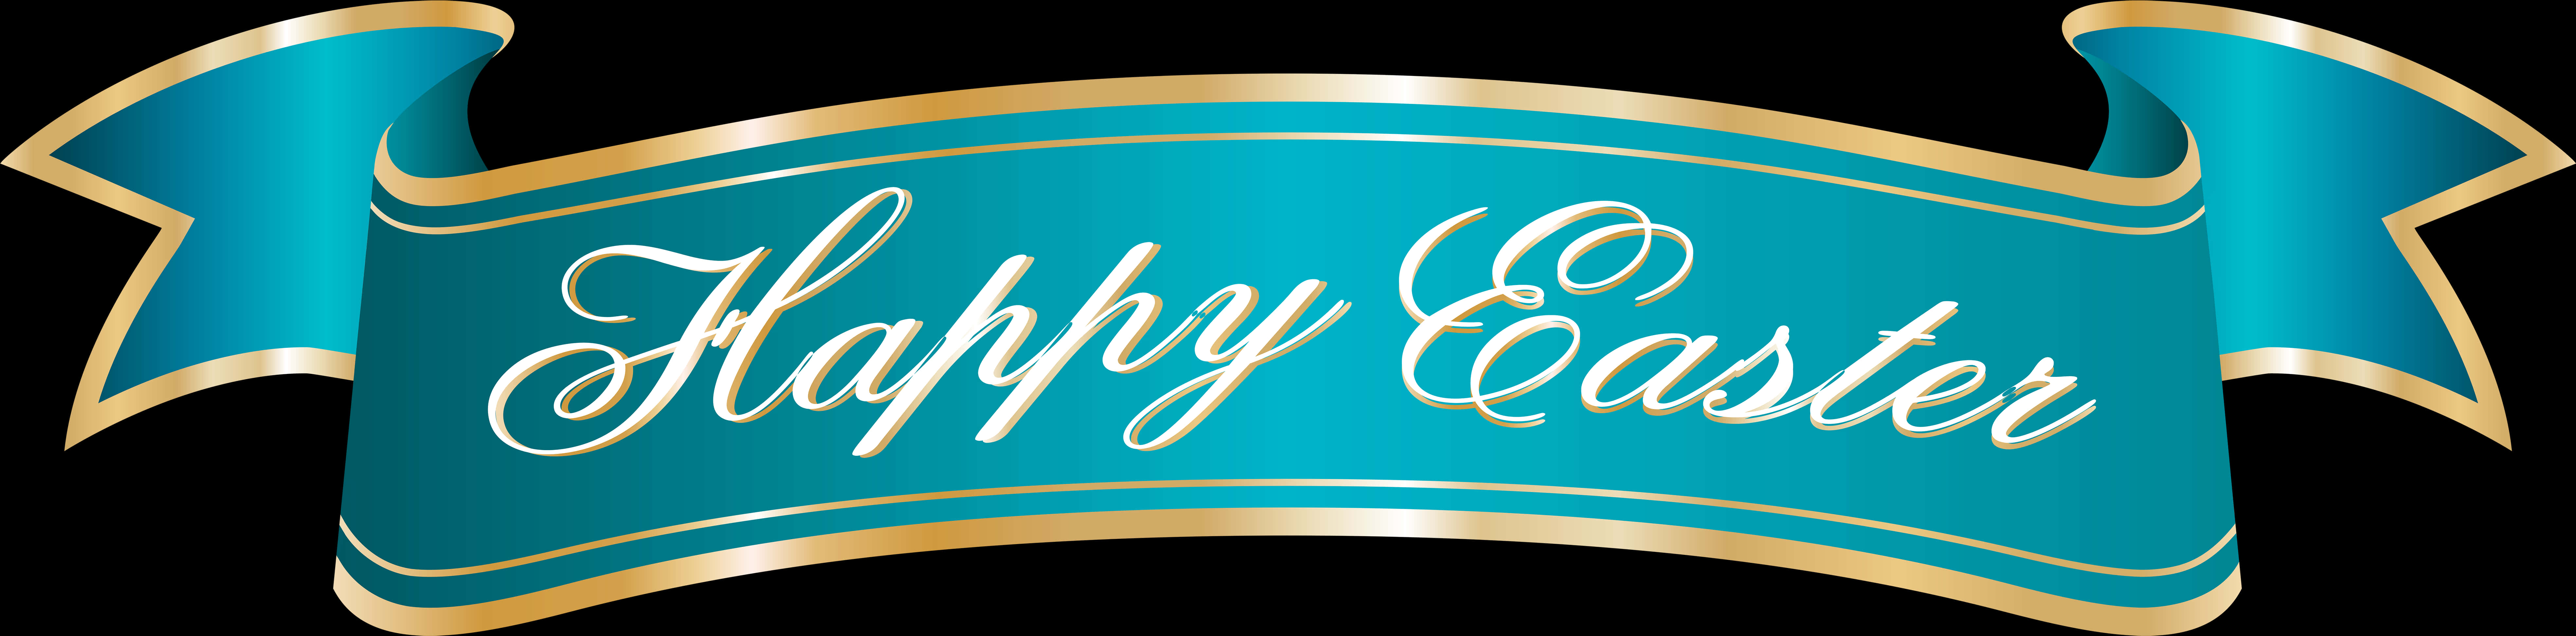 Happy Easter Banner Graphic PNG image